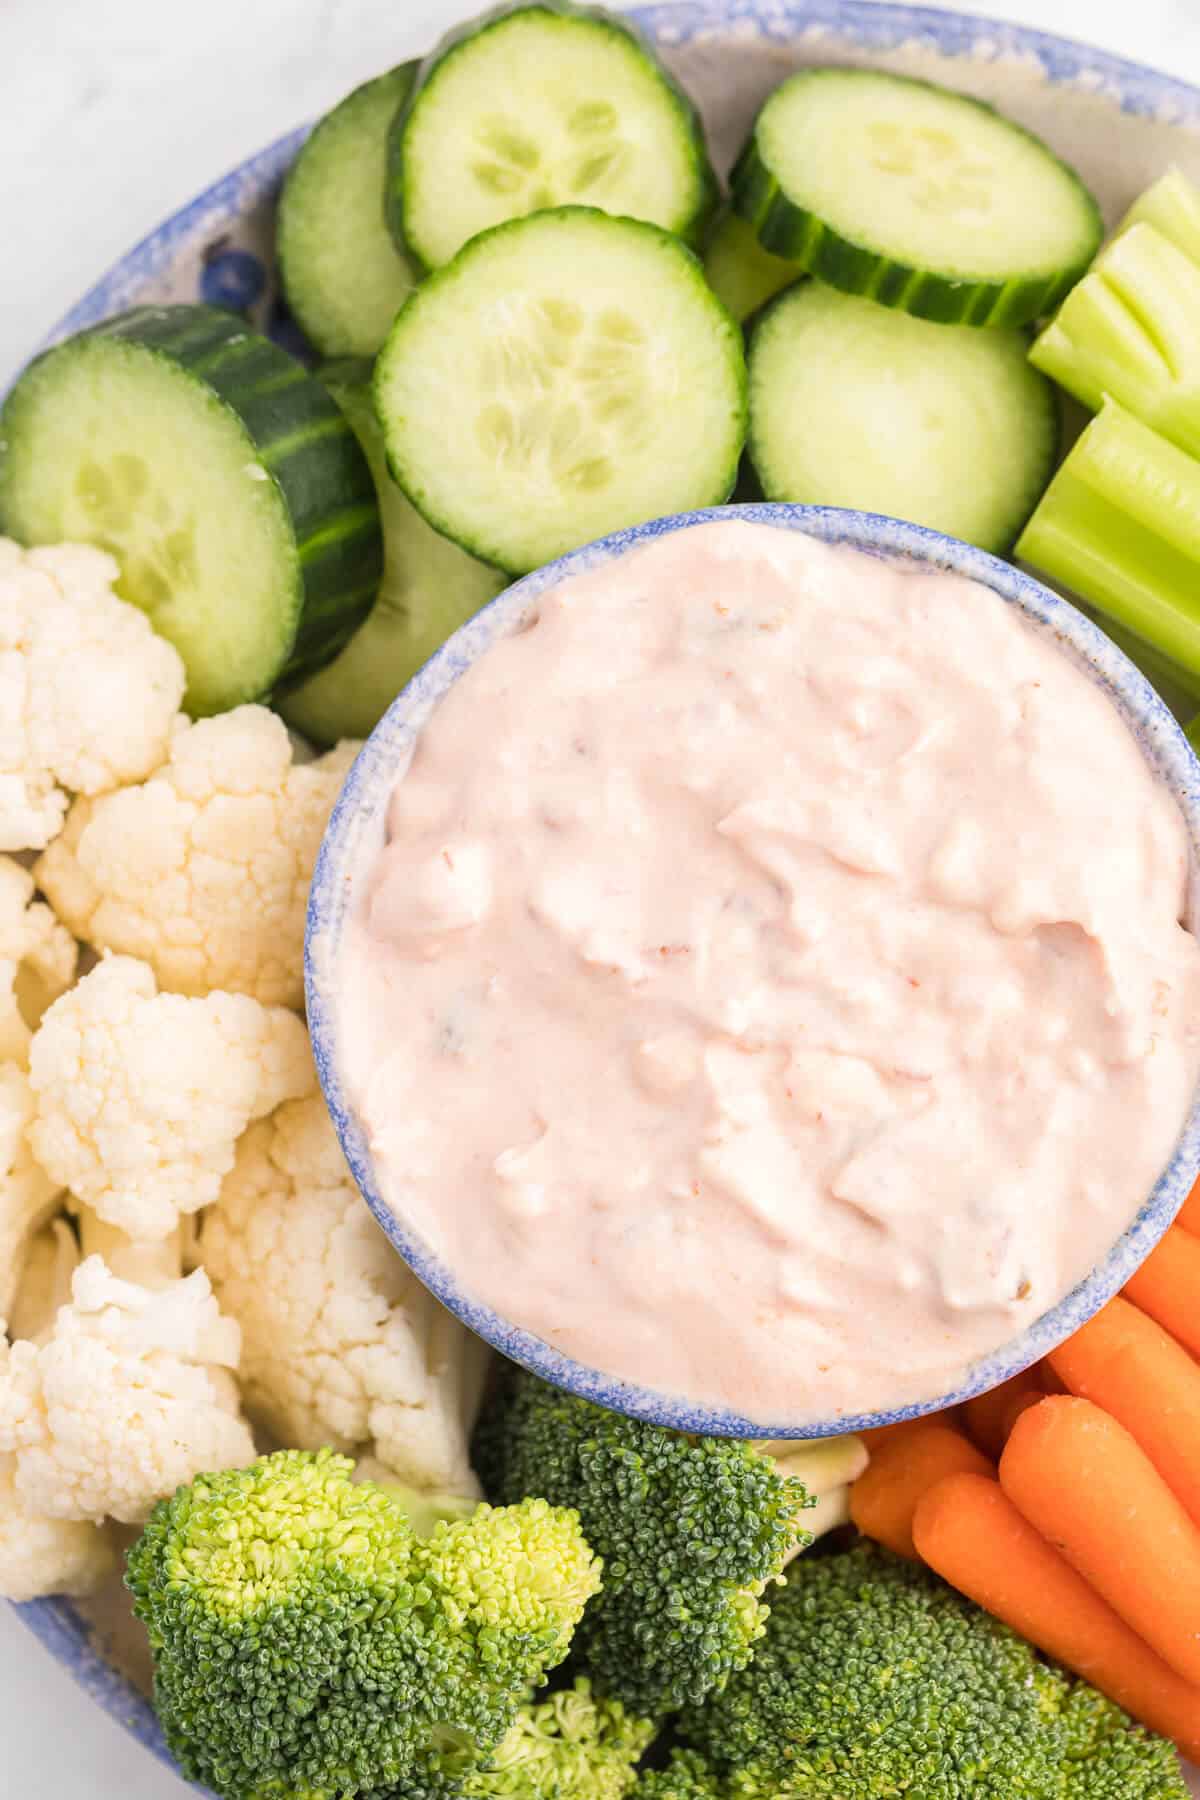 Creamy Salsa Dip - The tastiest veggie dip! Take your favorite Mexican appetizer and make it creamy for this Taco Tuesday.